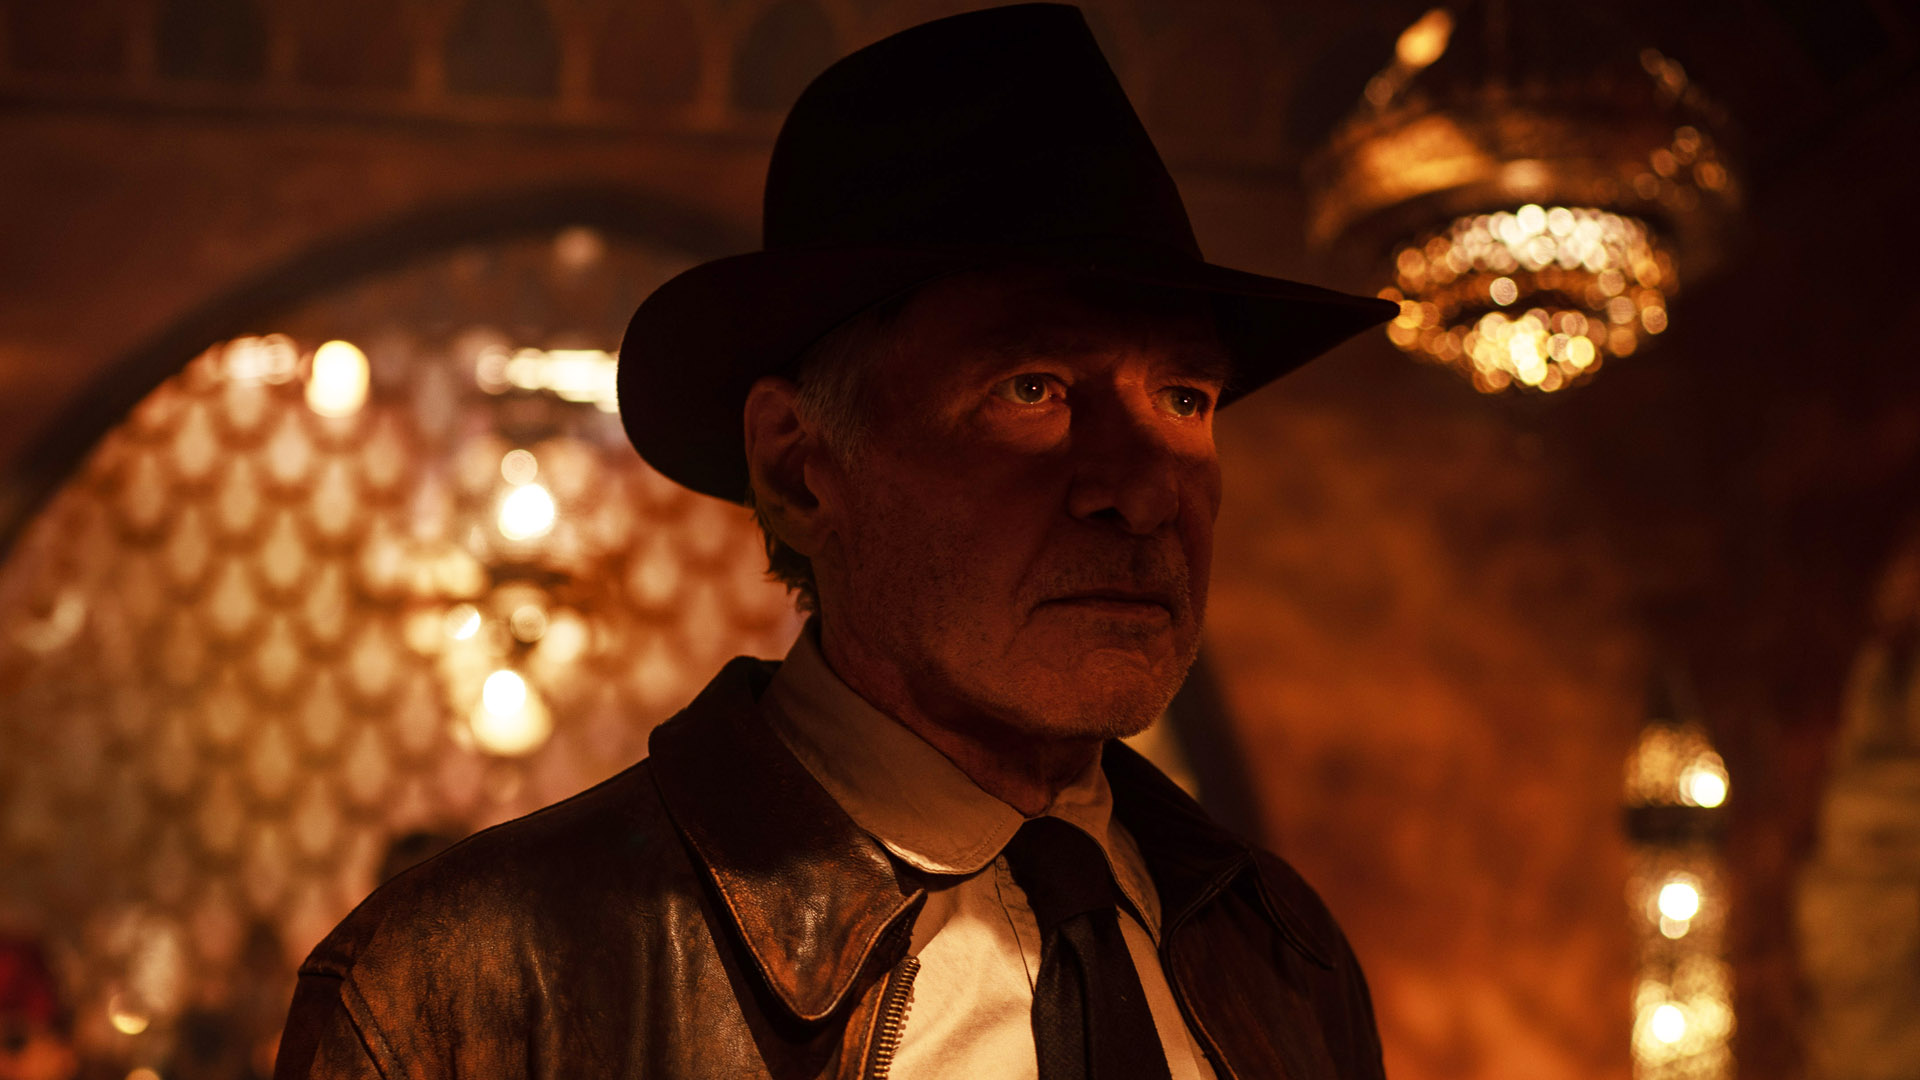 Indiana Jones 5 Trailer Reveals Official Title And Macguffin Artifact